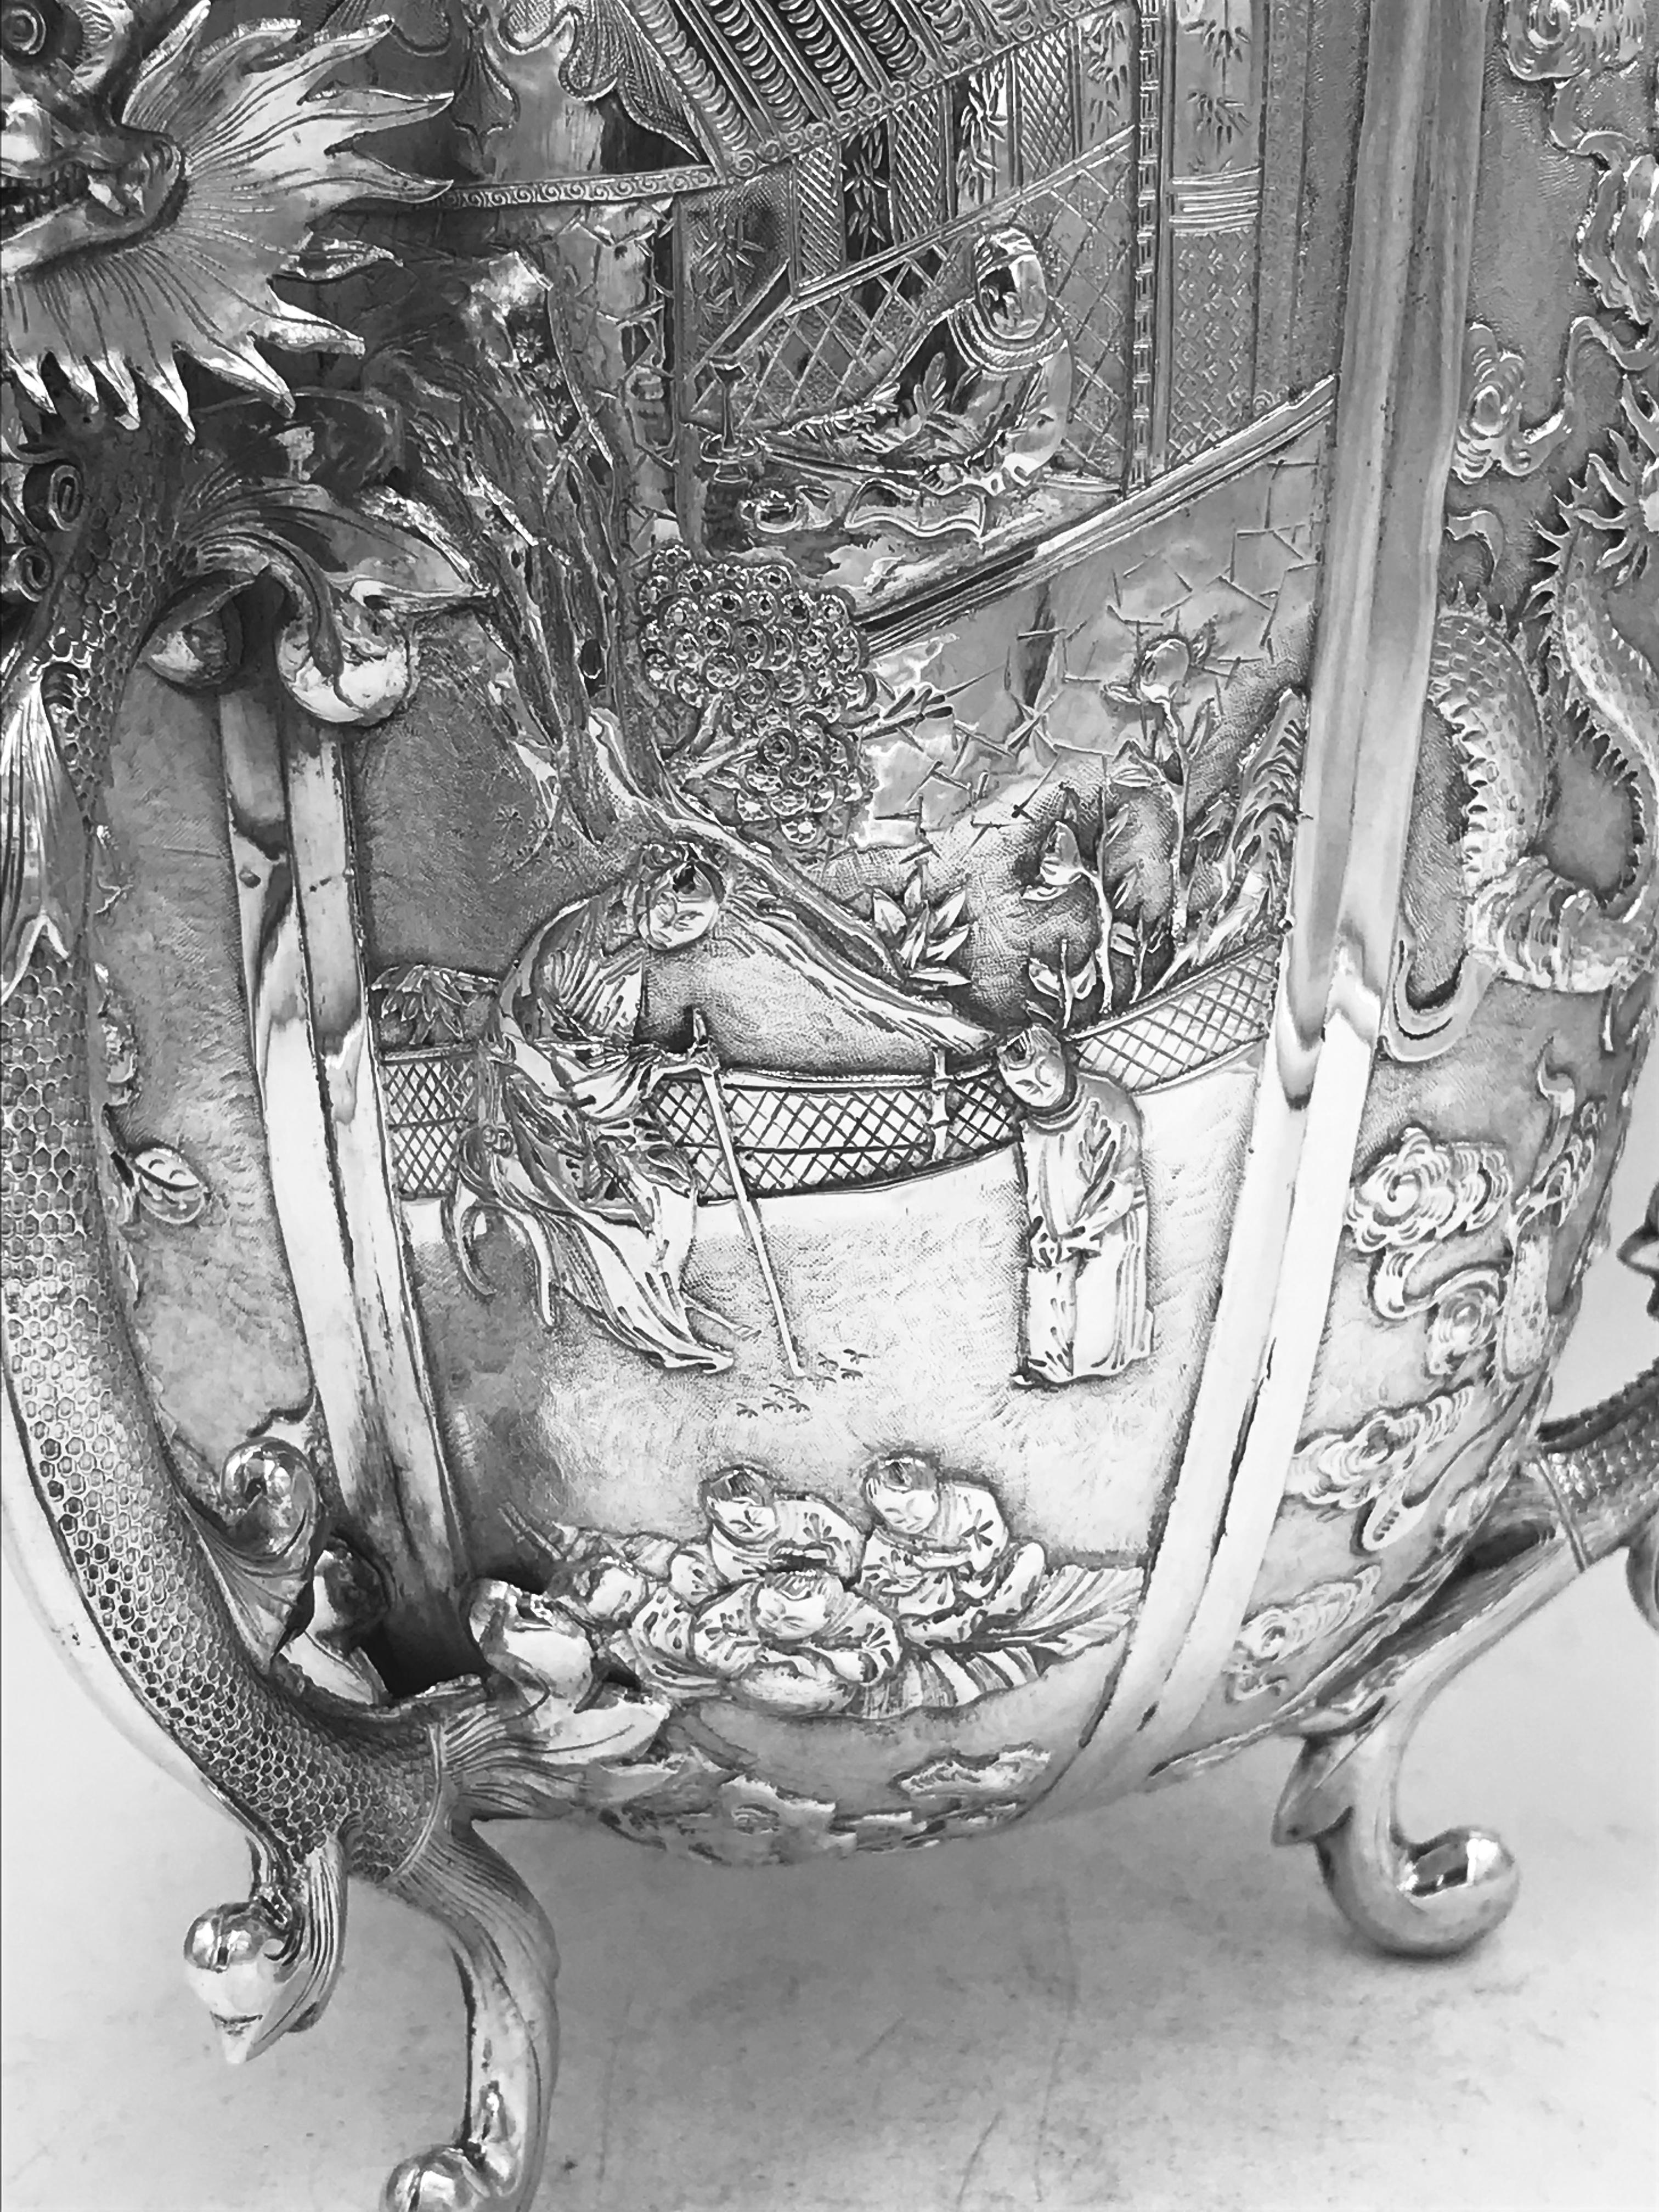 Chinese Export Silver Bowl 1